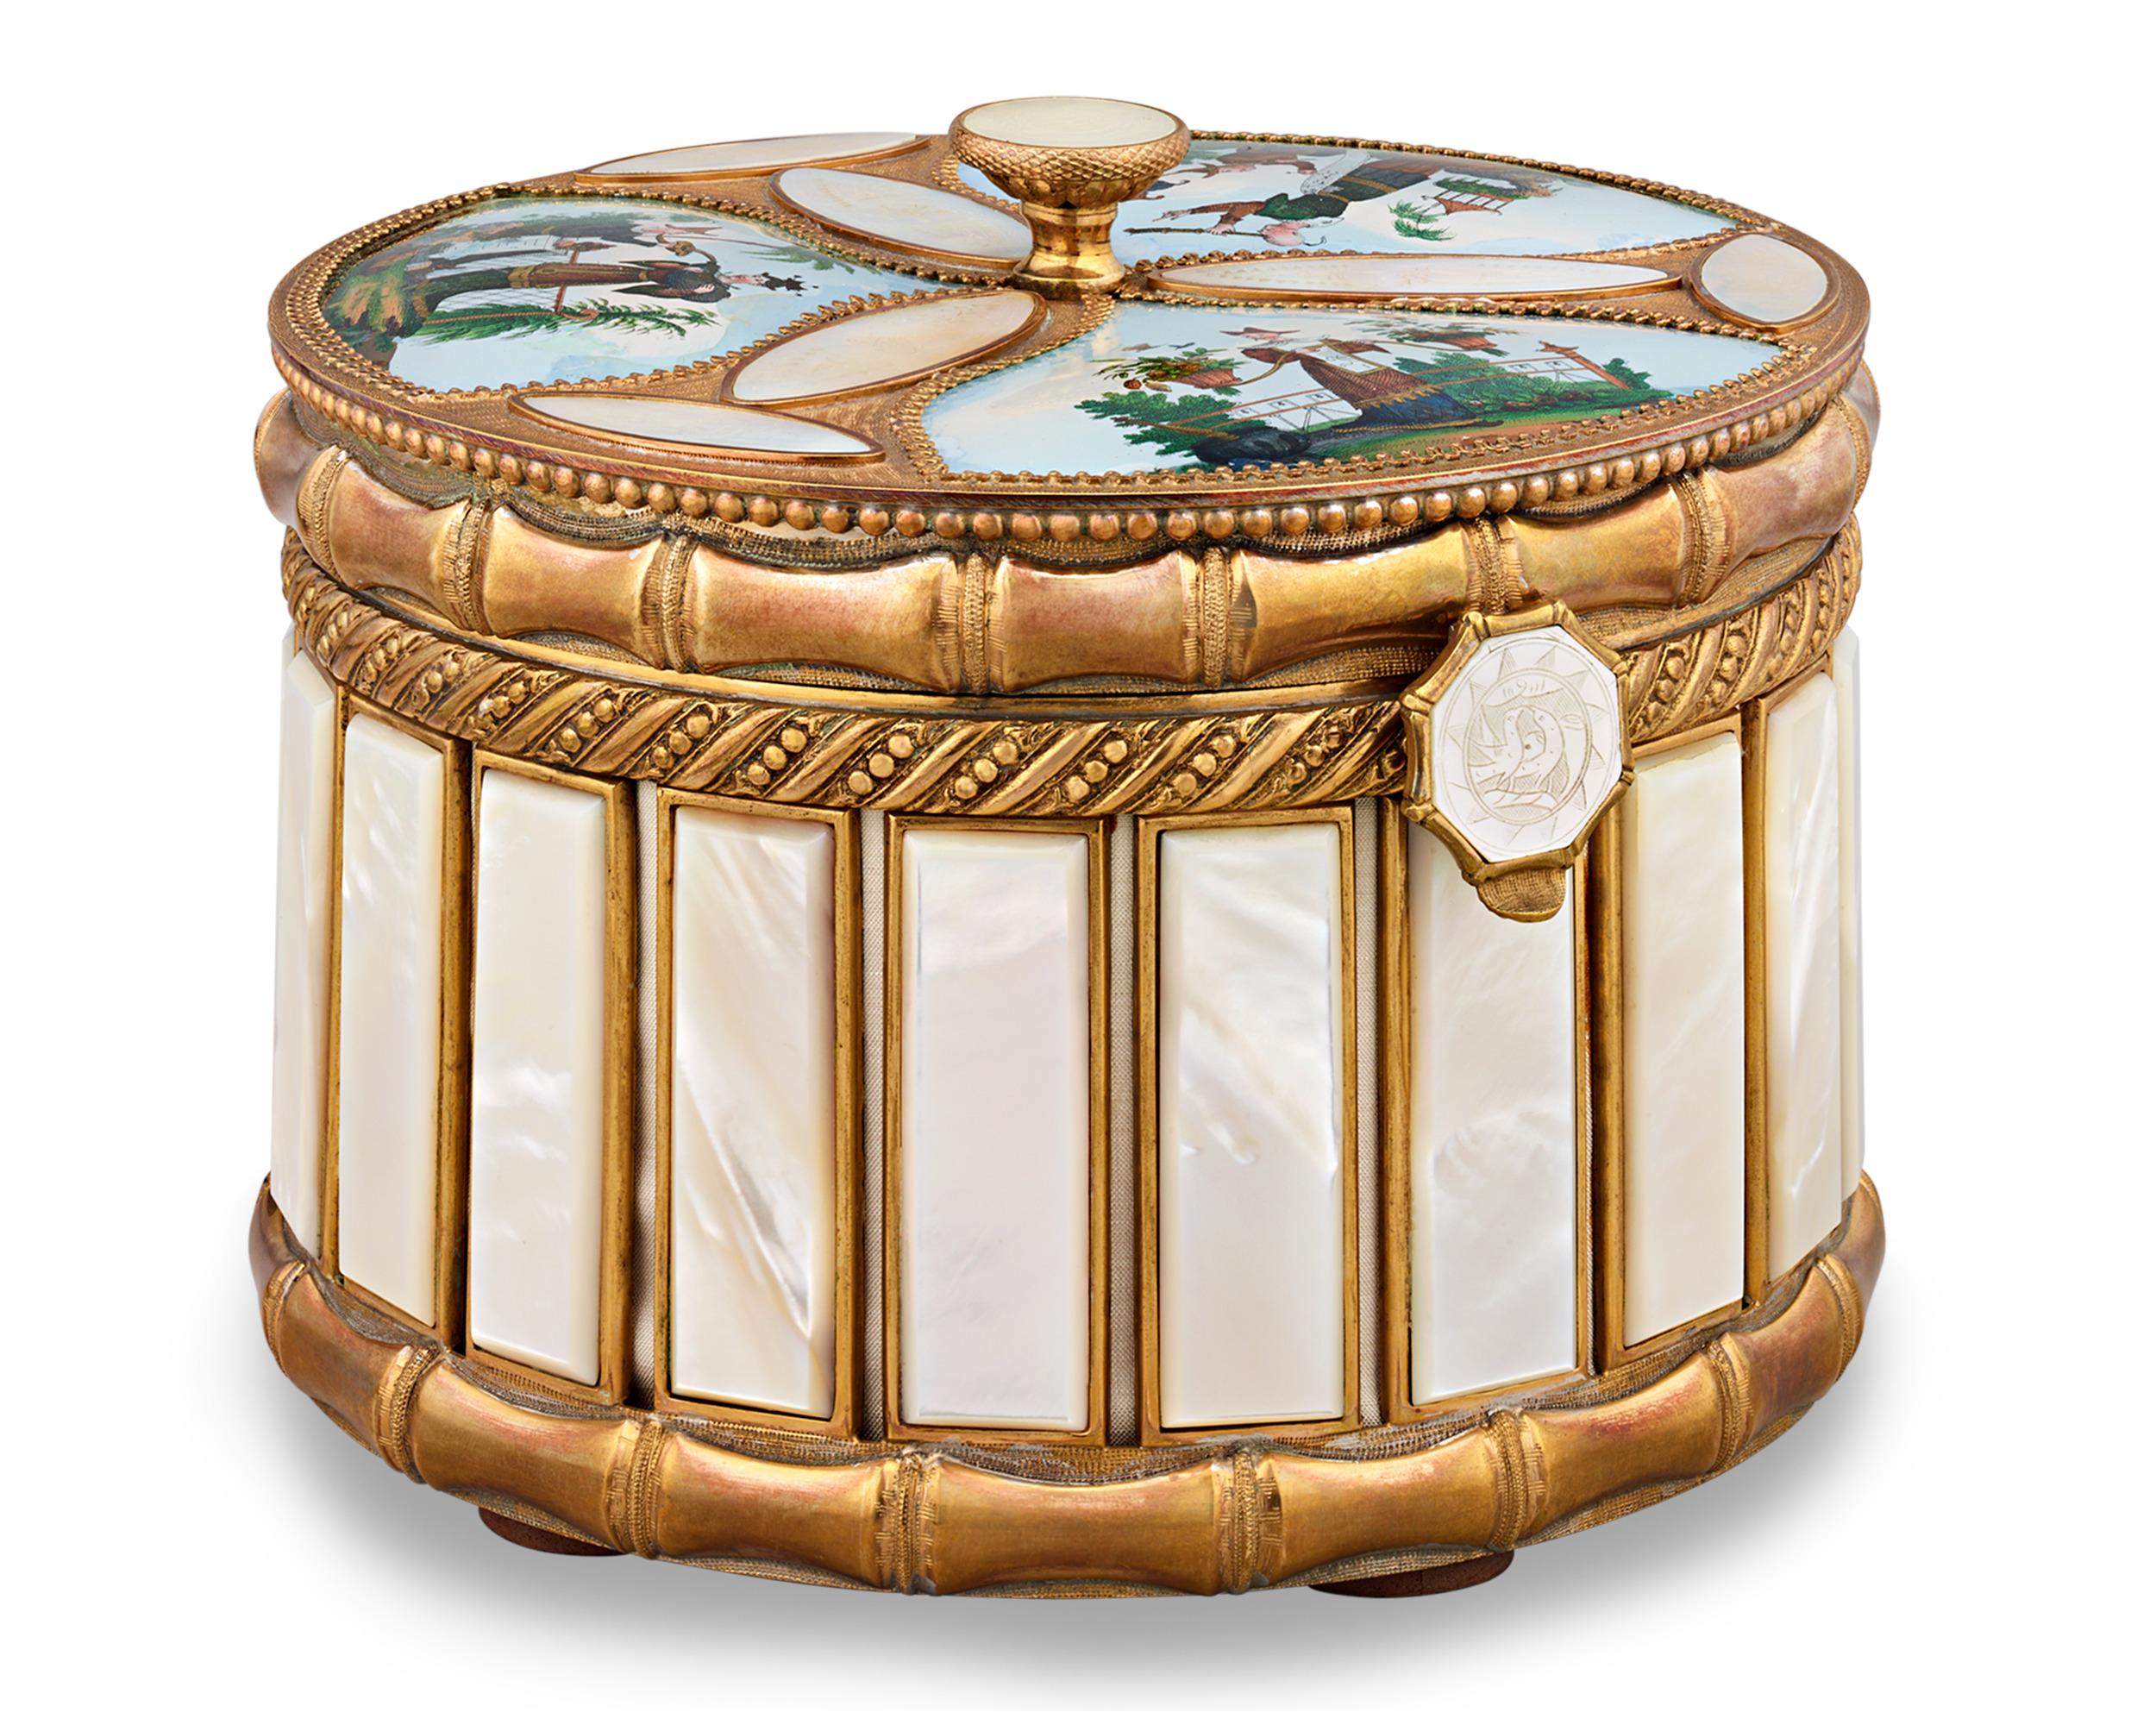 This mother-of-pearl inlay perfume box is a rare and complete treasure from the famed Palais-Royal of France’s Second Empire. The box is a work of art, meticulously fashioned to delight a regal perfume connoisseur. The lid features a medallion with